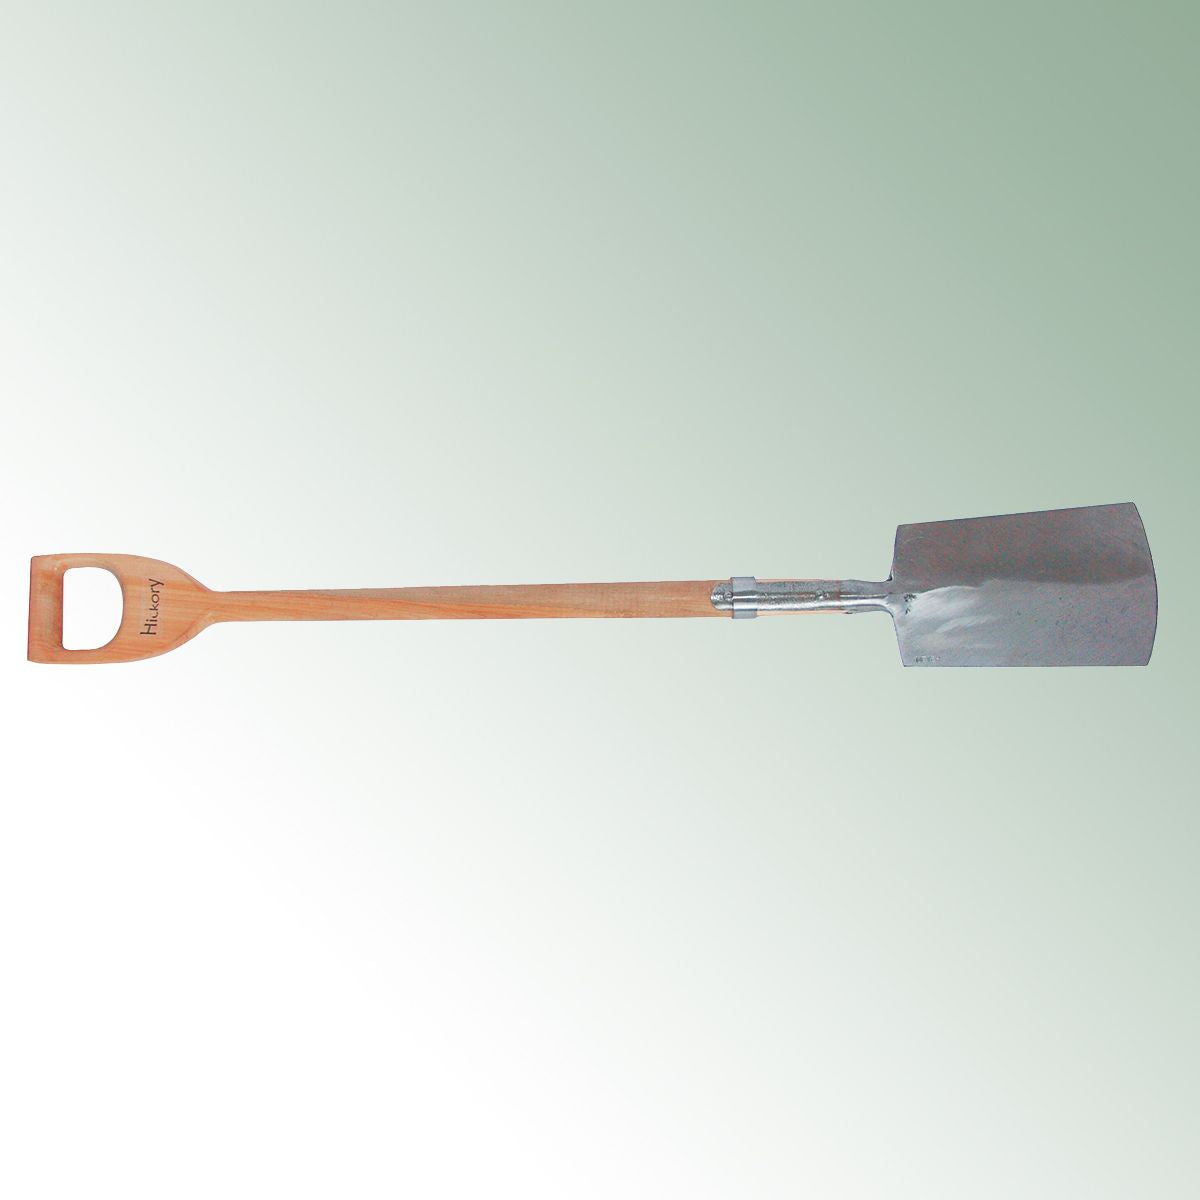 digging spade size B3 D-grip with hickory handle